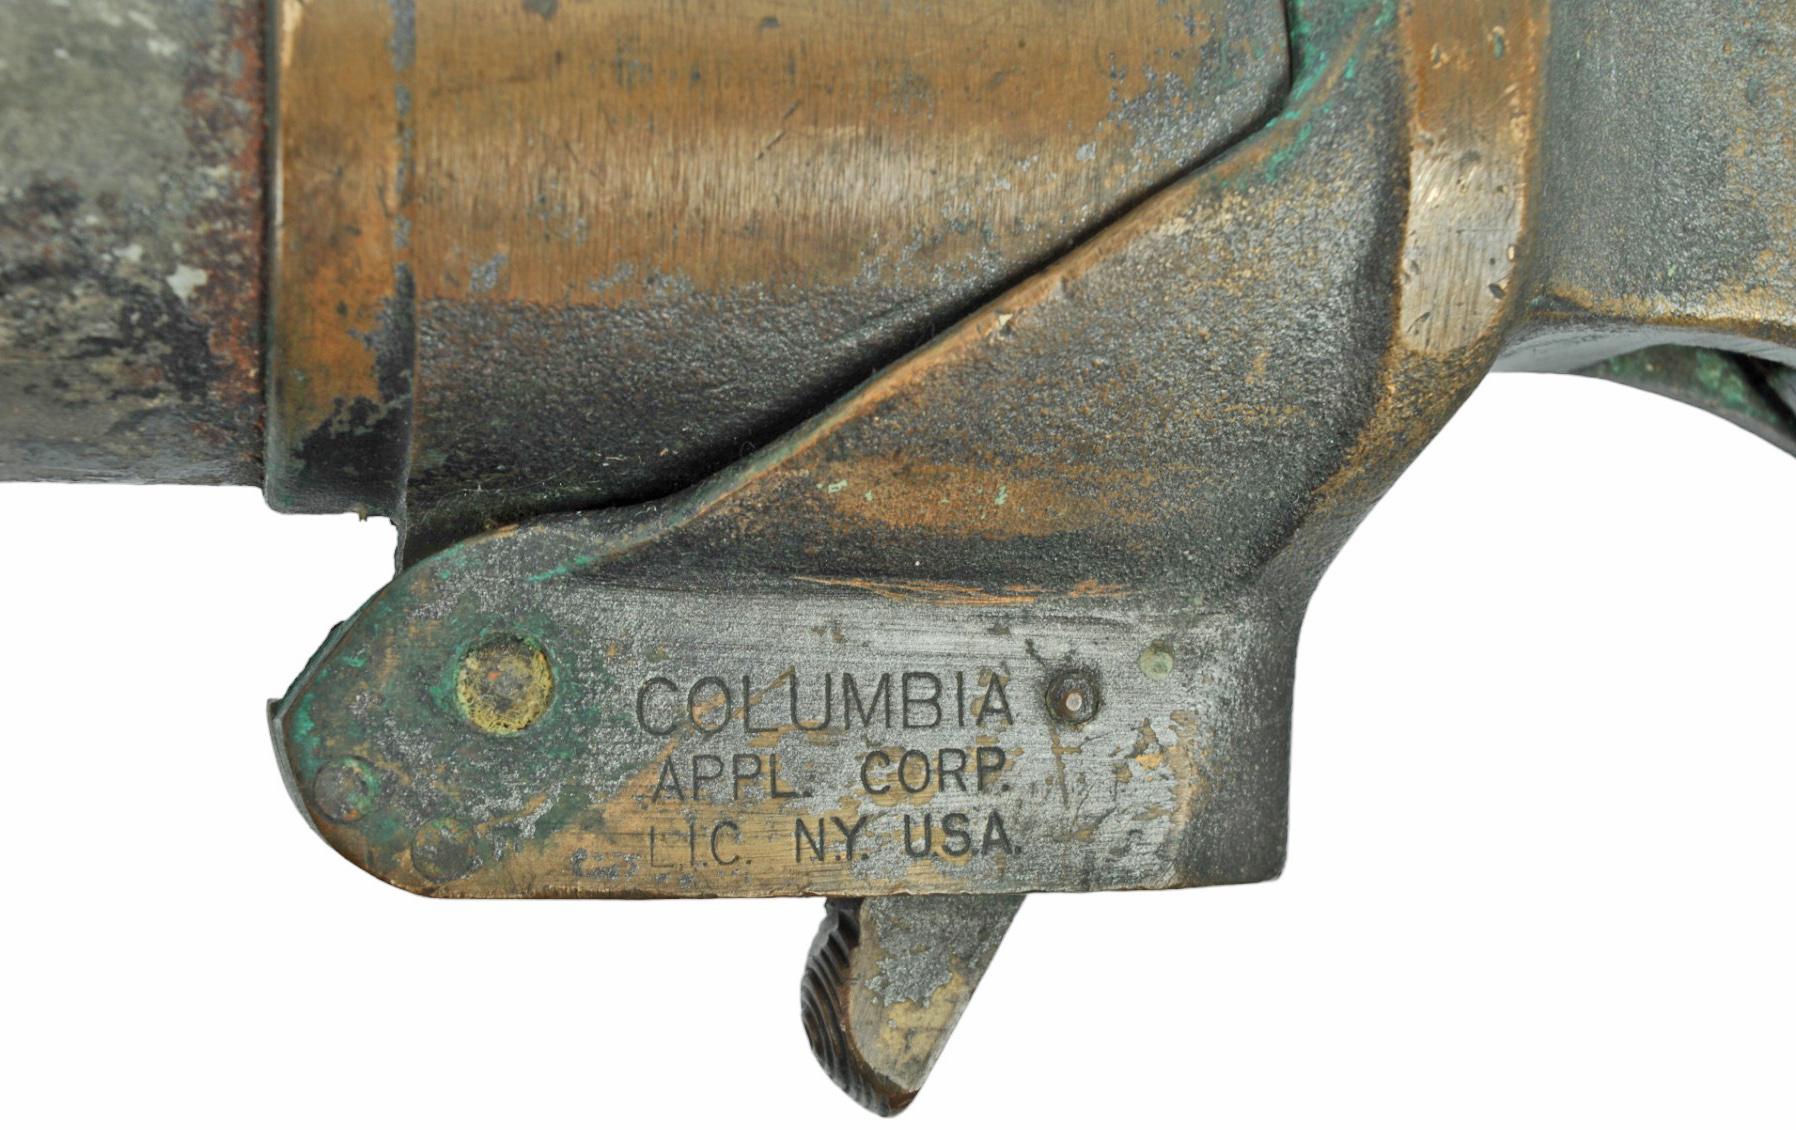 RARE WWII US Military Columbia Model 3 37mm Flare Pistol - no FFL needed (KDW1)